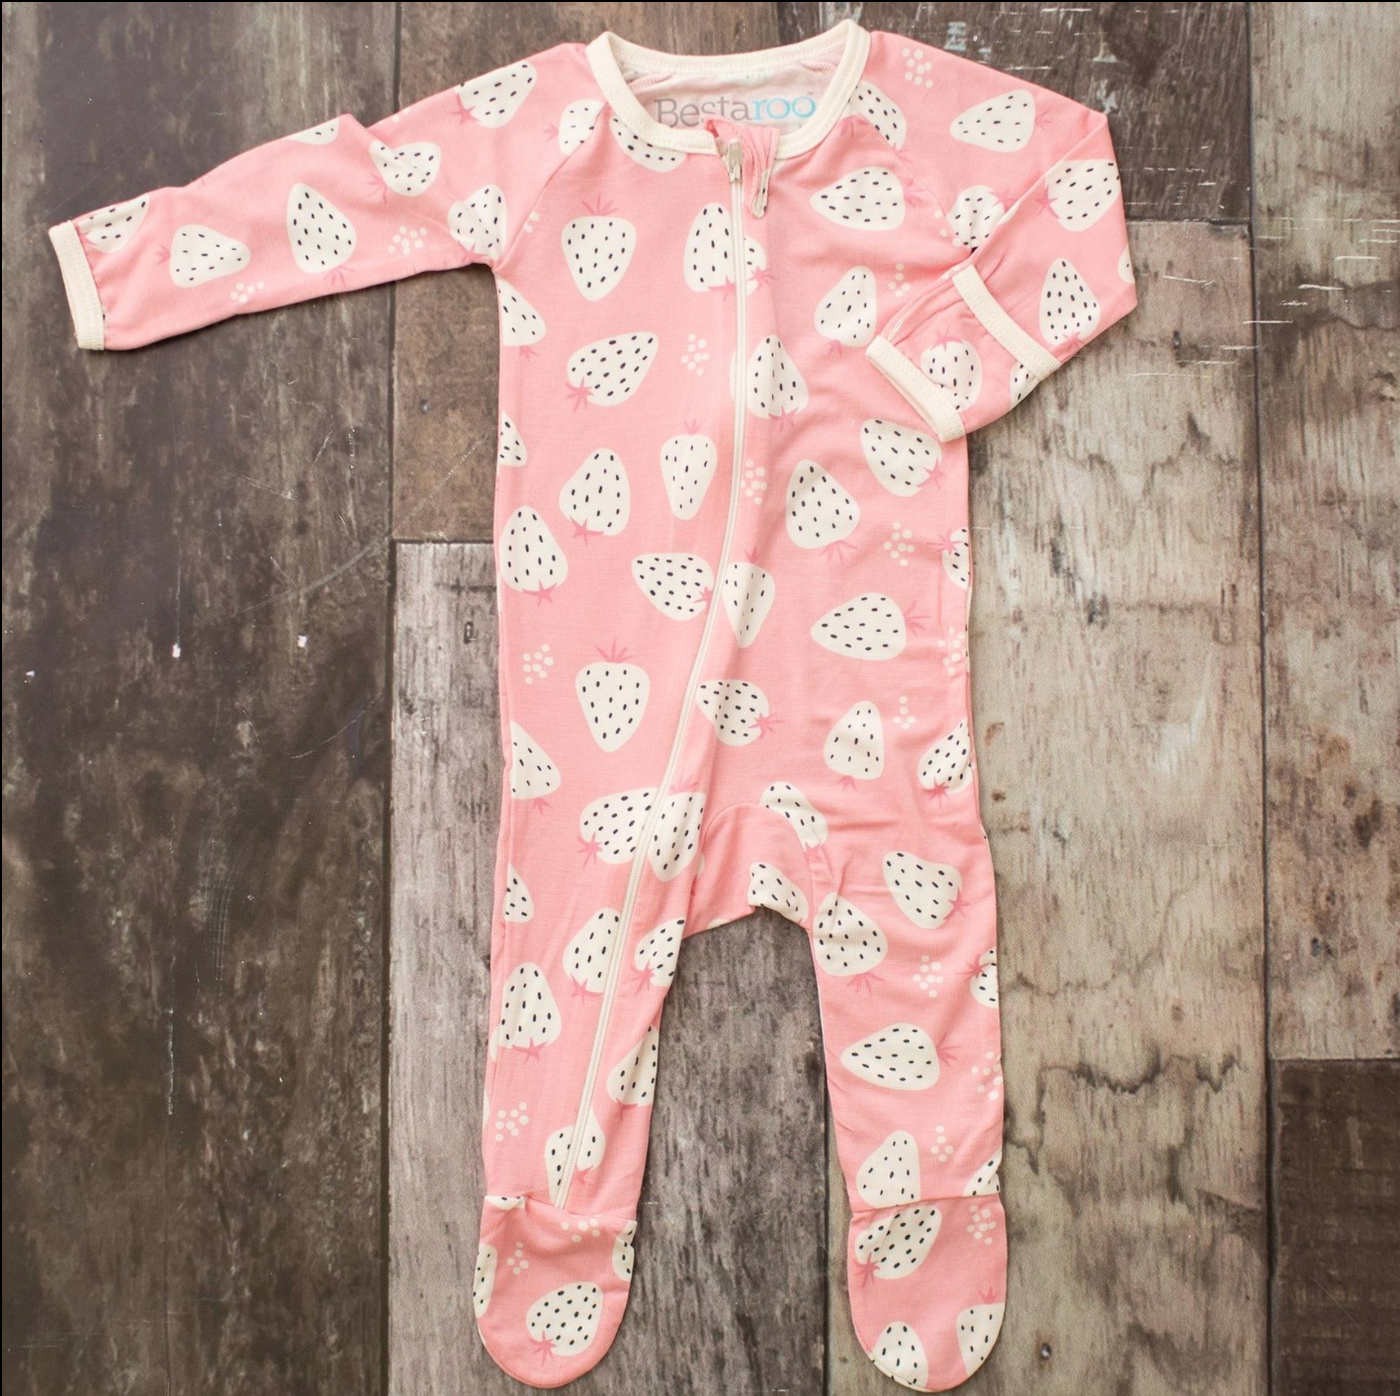 Baby Strawberry Footie Outfit